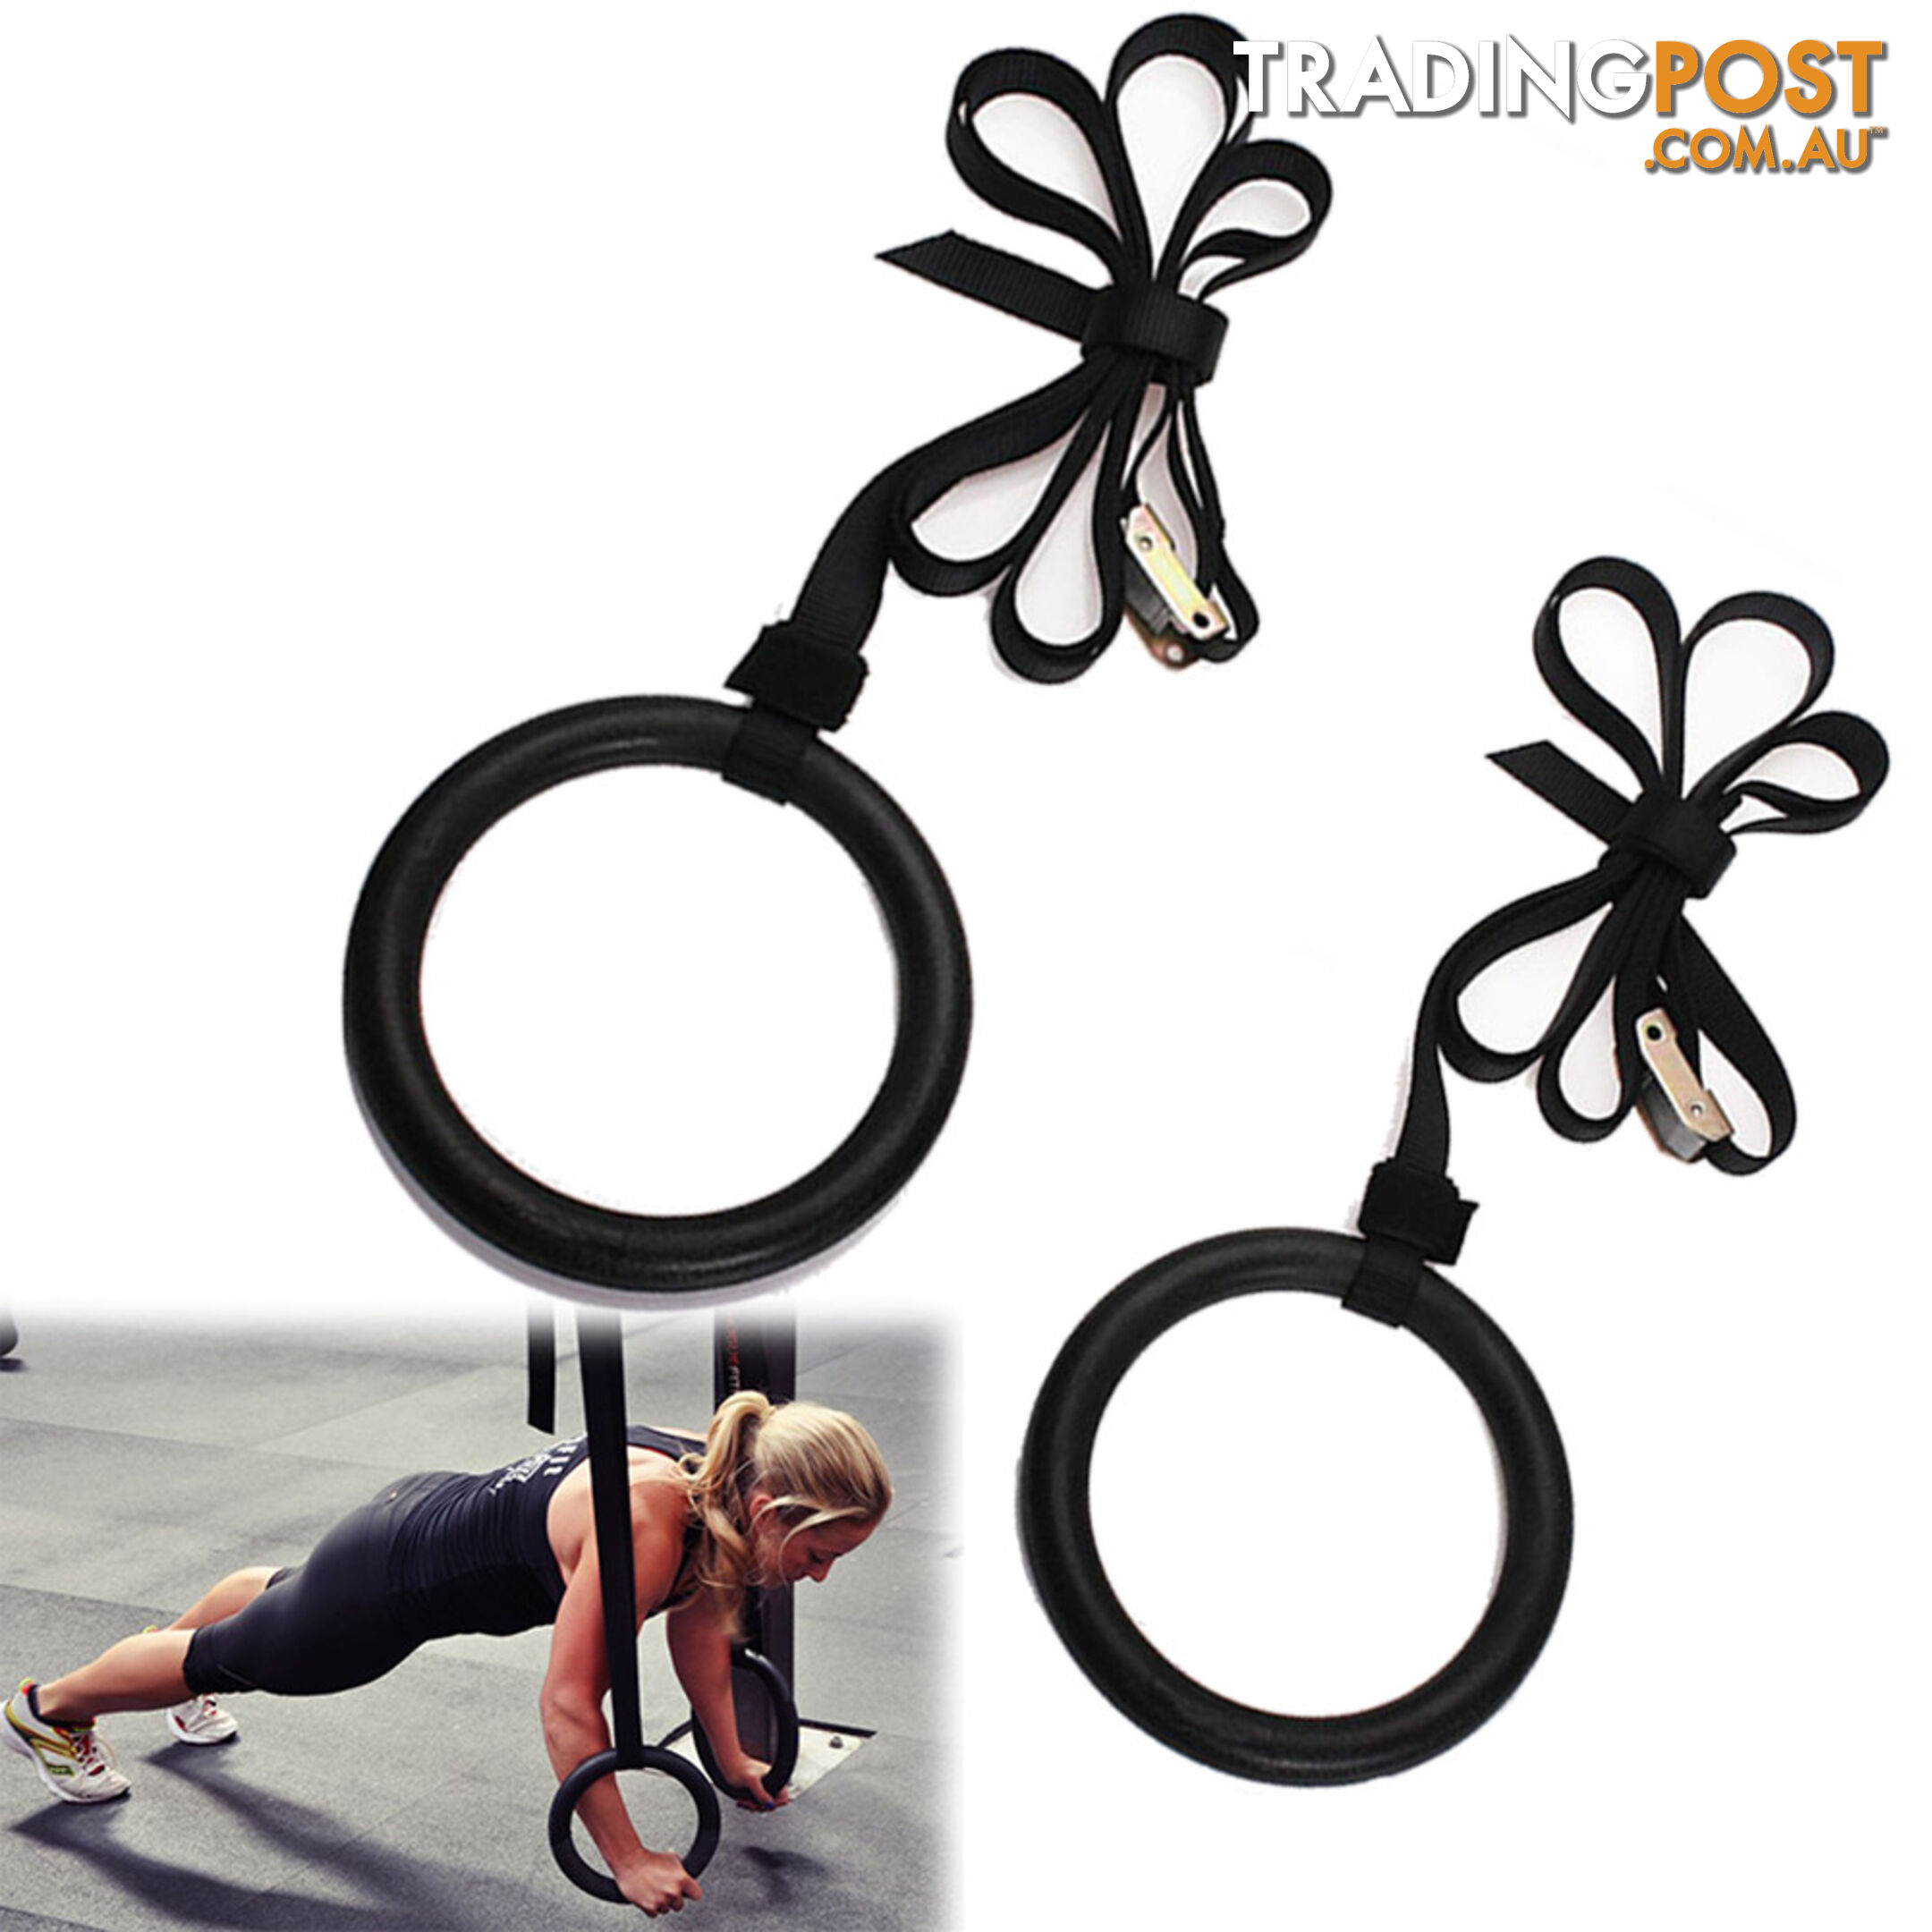 Gymnastic Gym Rings Hoop Crossfit Exercise Fitness Home Workout Dip Pair Bars